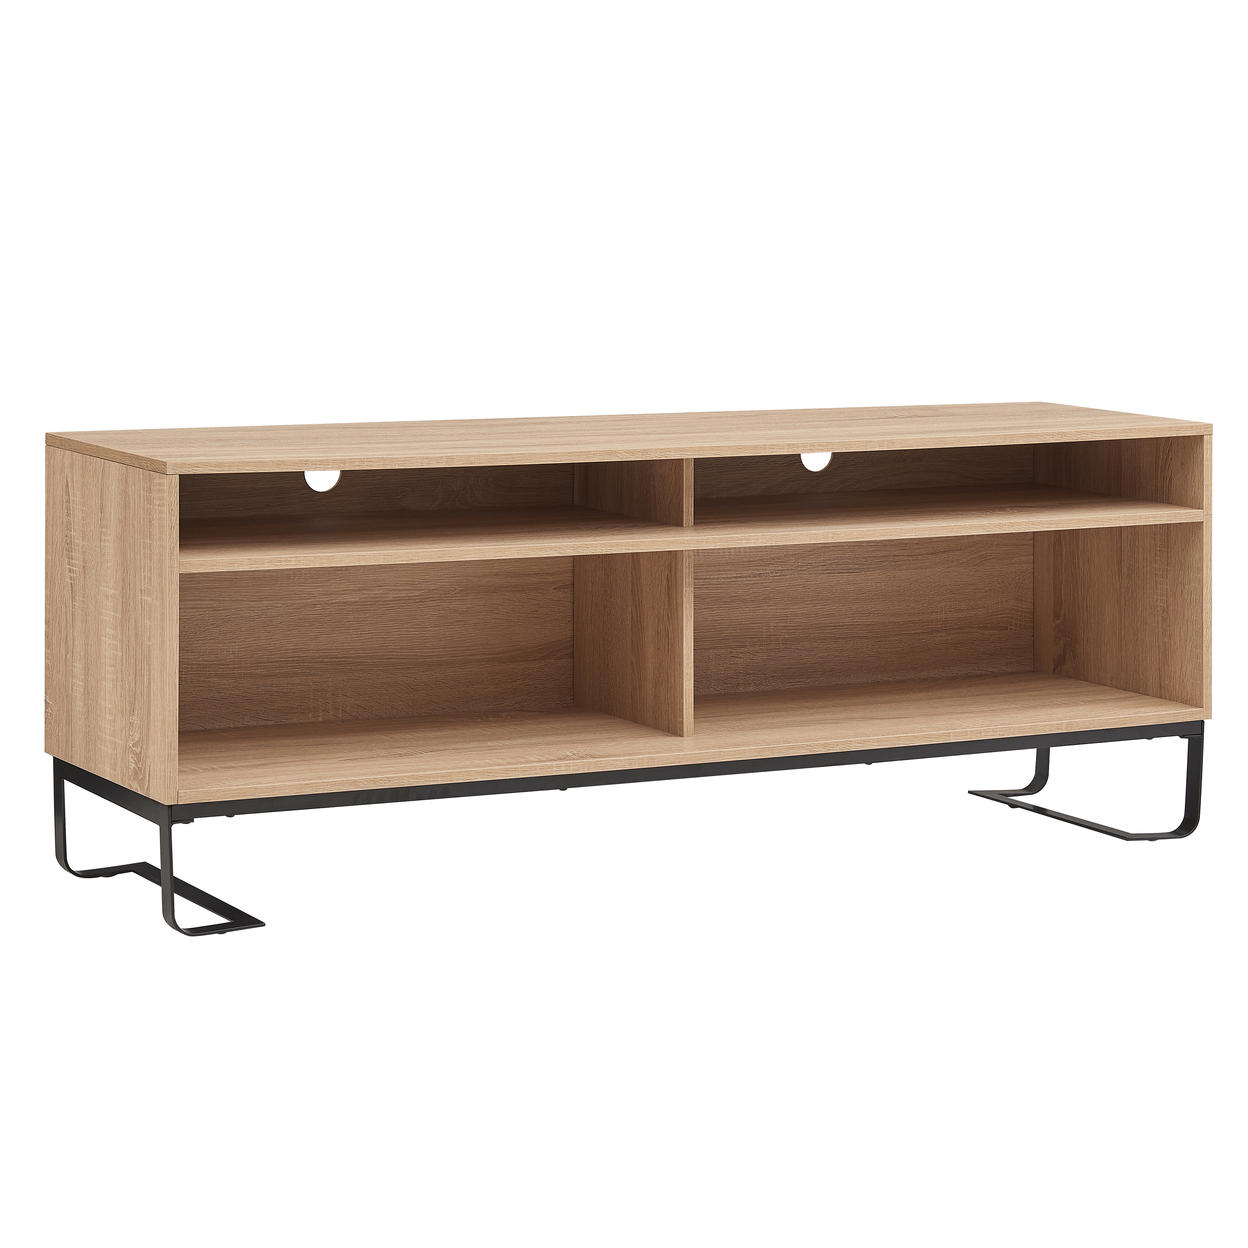 60 Inch Modern TV Media Entertainment Console, 4 Compartments, Metal Frame Base, Light Oak Brown